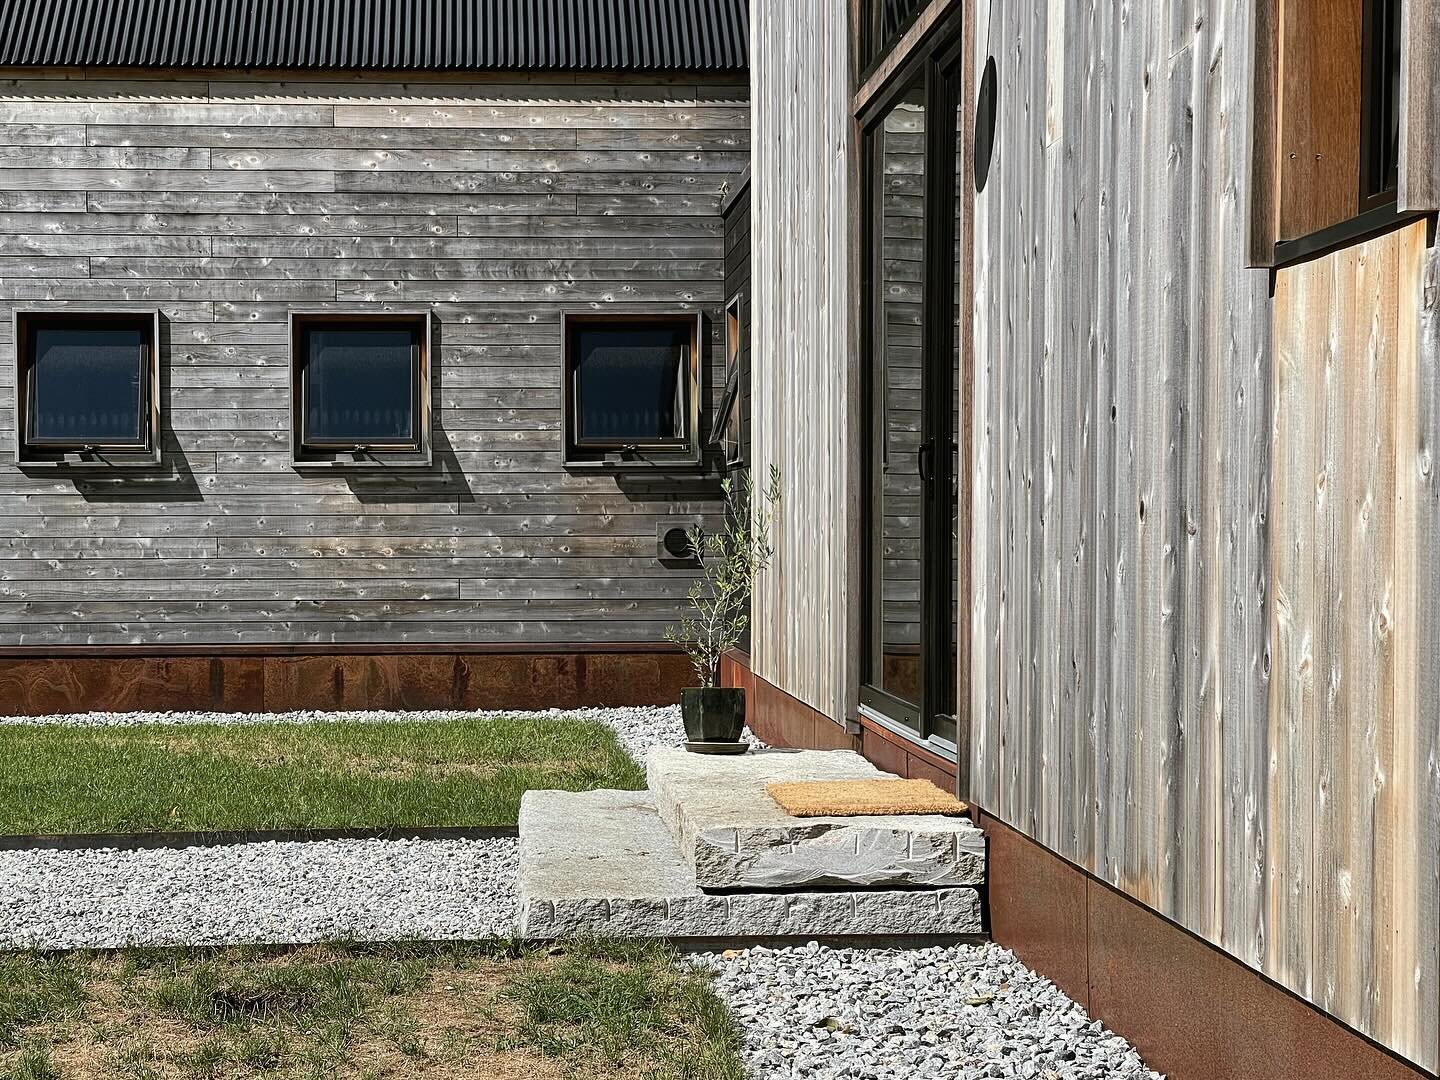 Naturally weathered cedar
Corten steel
Glass
Stone

- designed by @blockdesignbuild 
- built by @blockdesignbuild 

#moderndesign #designbuild #design #rustic #weathered #naturalelements #nordic #barnhome #lymect